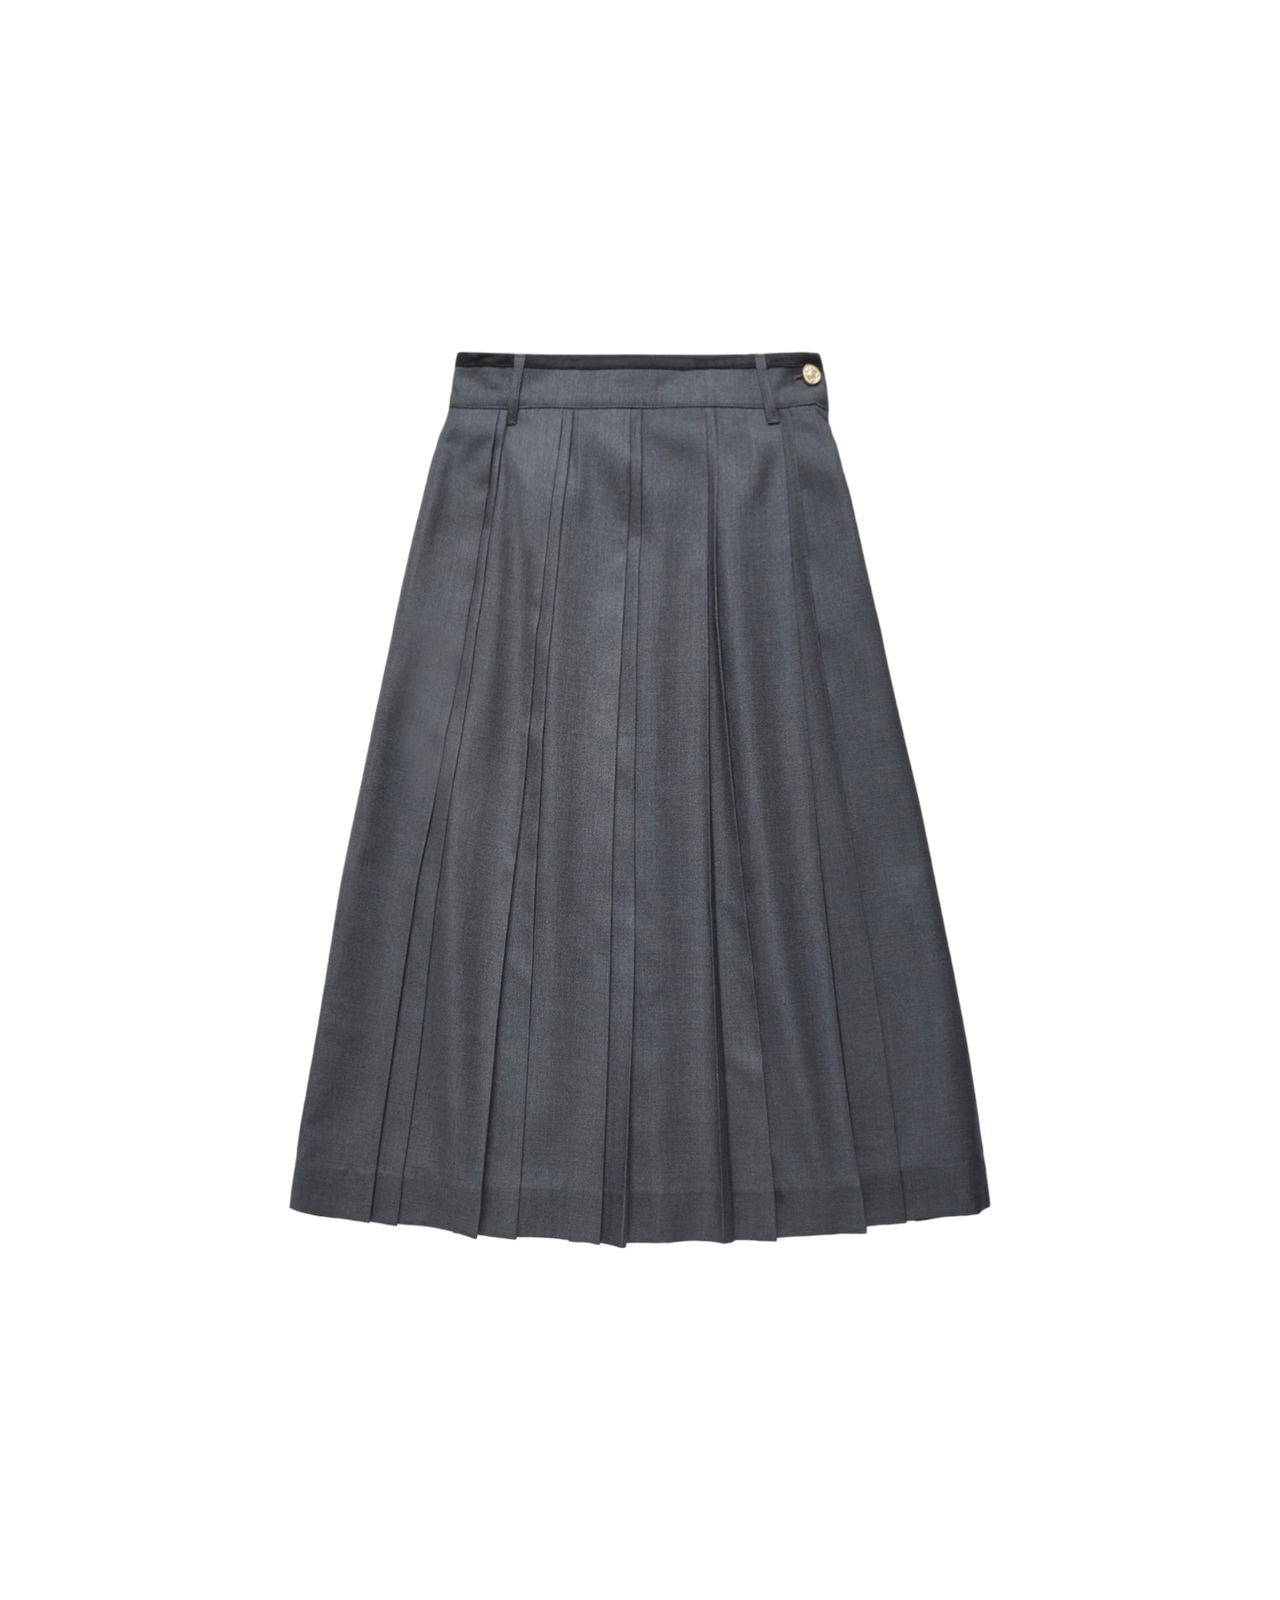 Double Pleats Skirt In Charcoal Grey